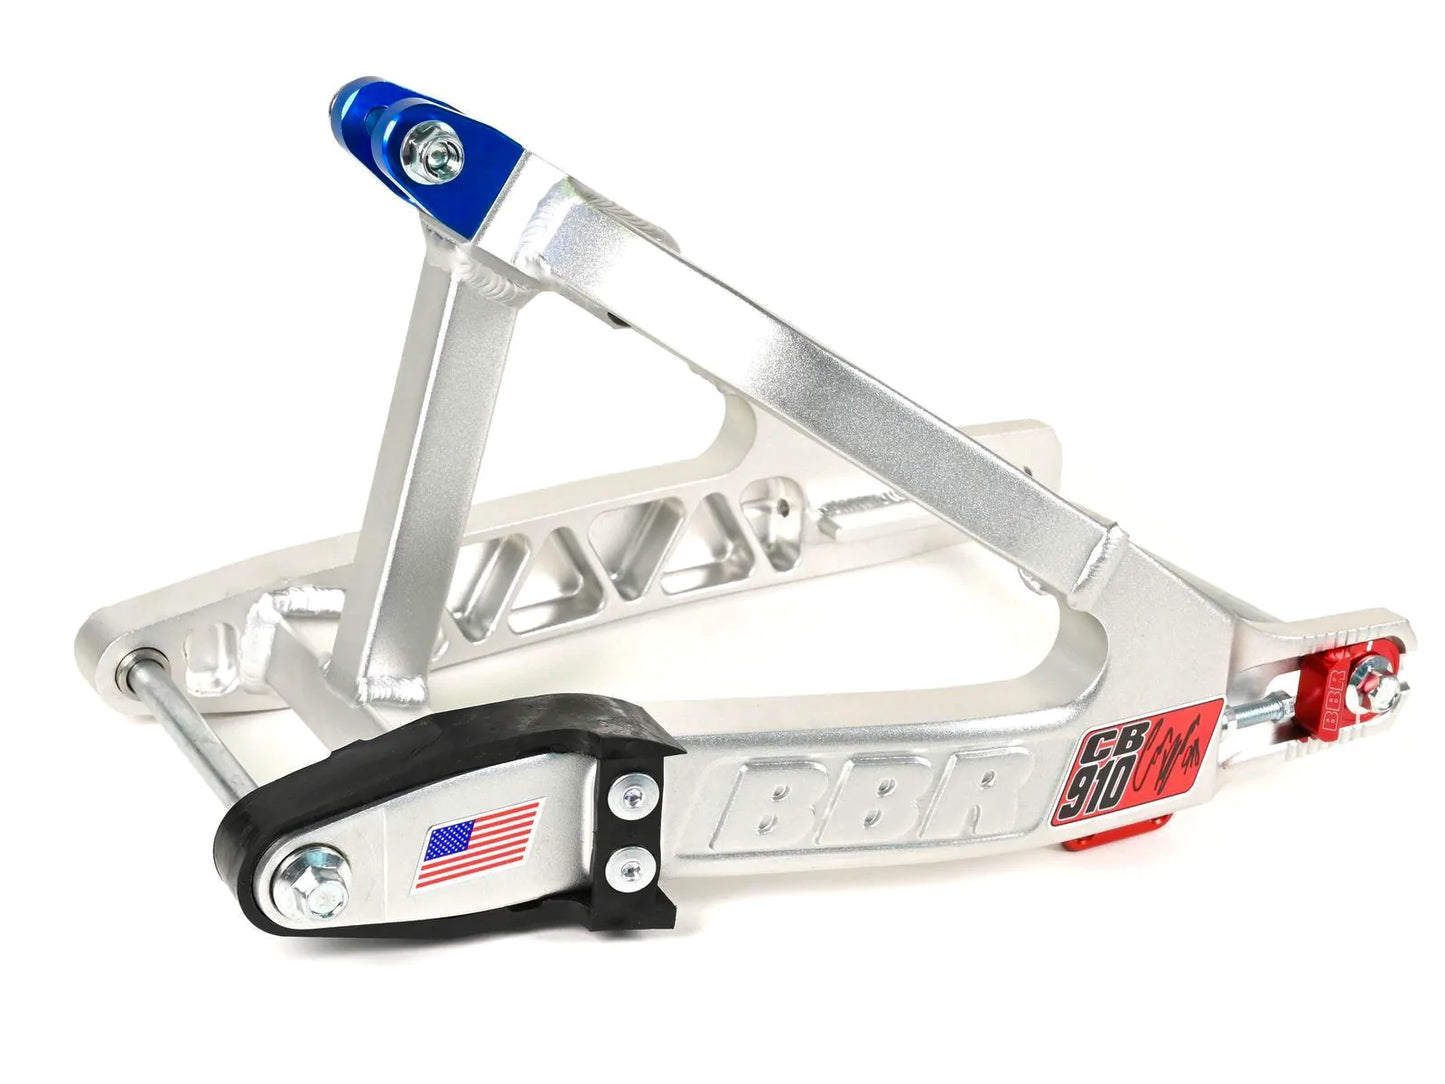 BBR Swingarm - Stock Comp Signature CRF110F (Includes Chain Guide)